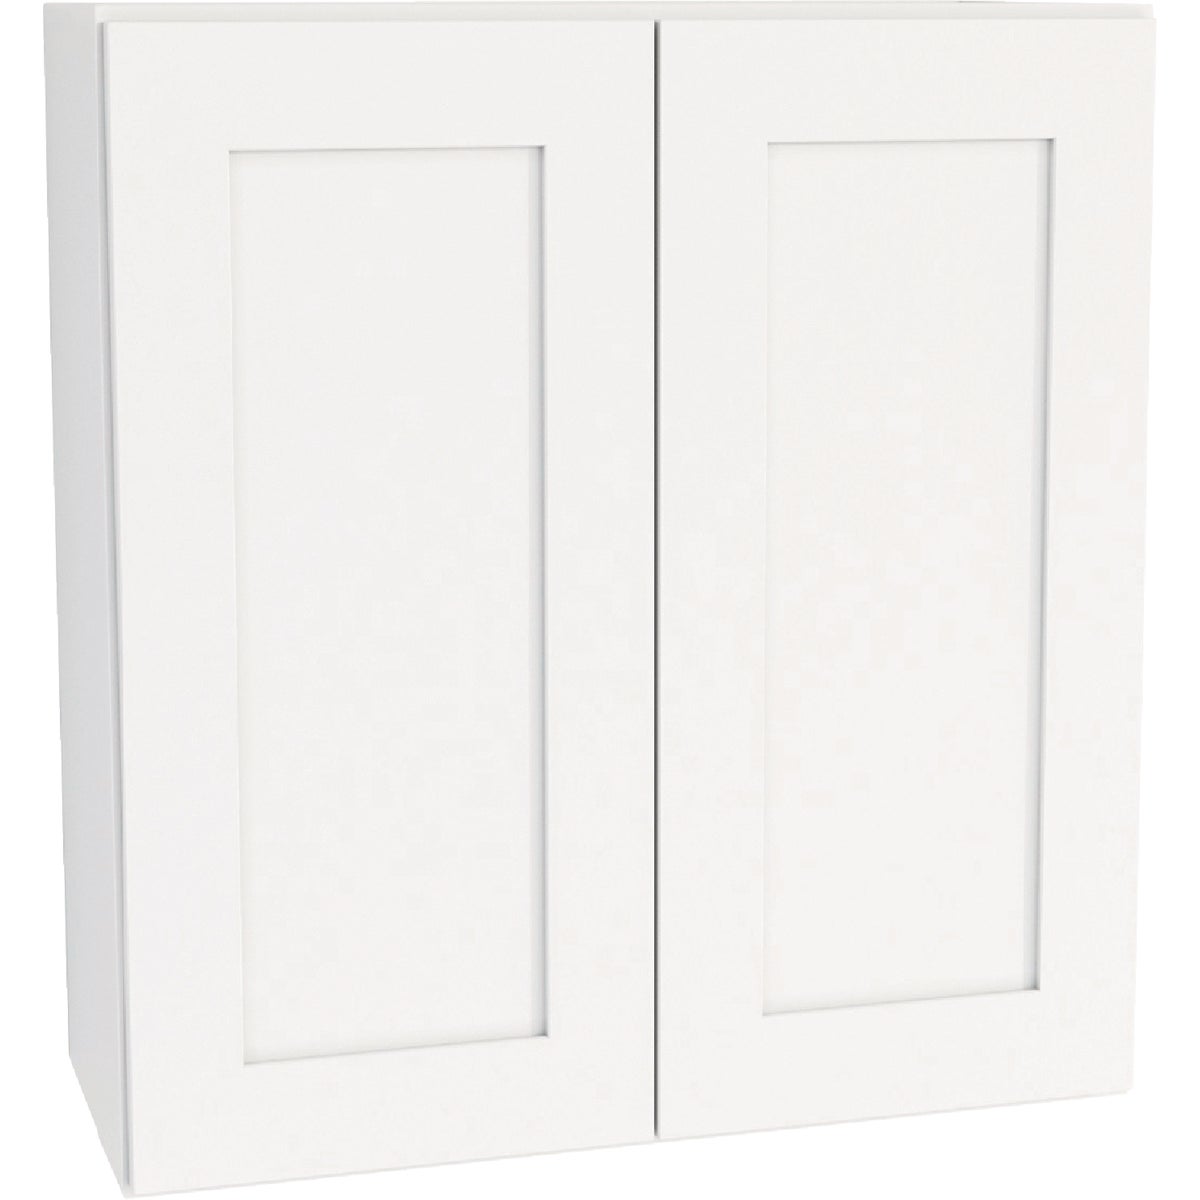 CraftMark Plymouth Shaker 24 In. W x 12 In. D x 30 In. H Ready To Assemble White Wall Kitchen Cabinet